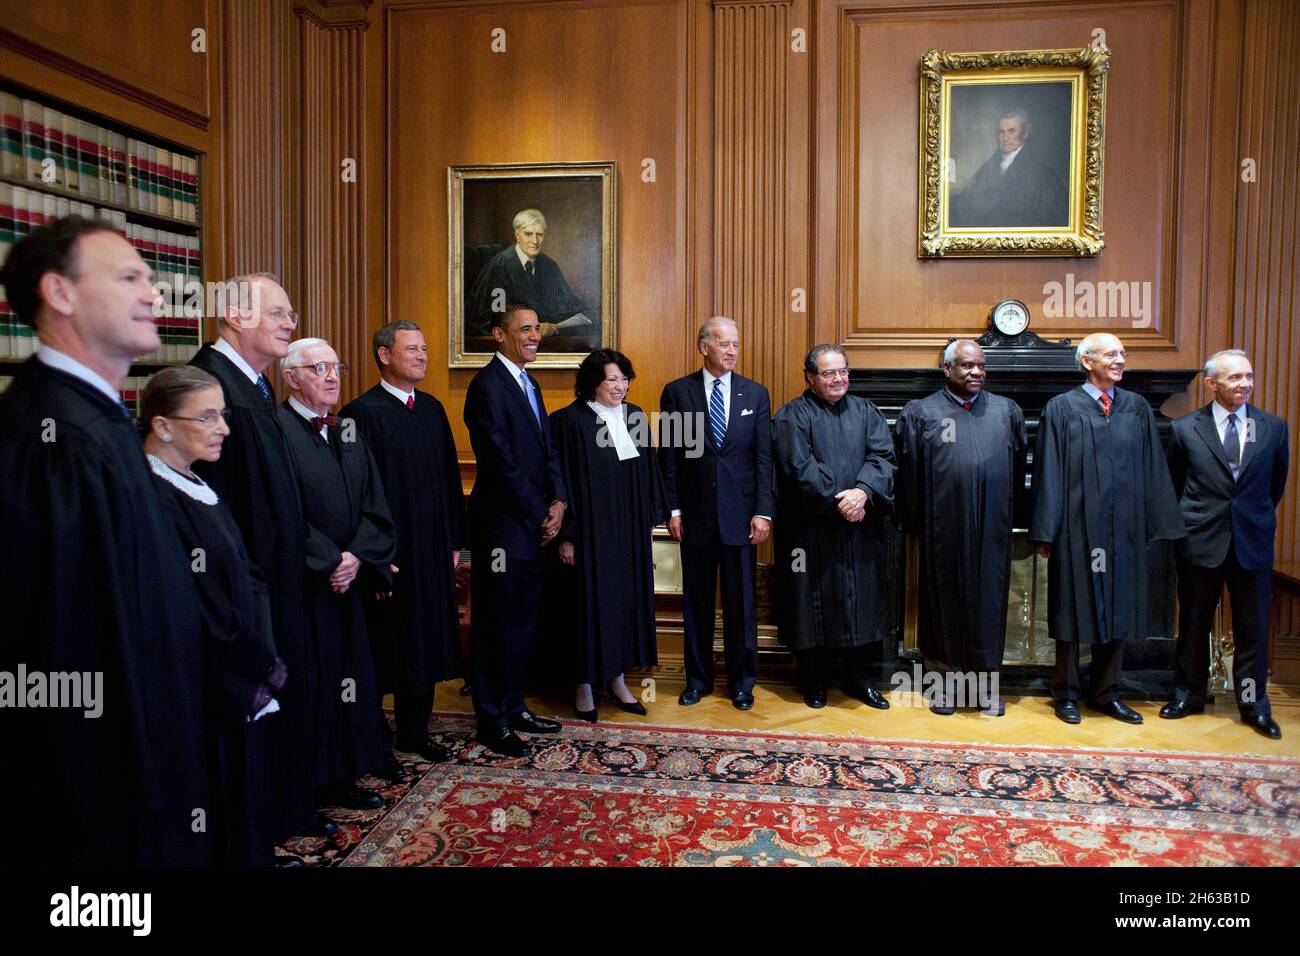 President Barack Obama and Vice President Joe Biden meet with Supreme Court Justices prior to the investiture ceremony for Justice Sonia Sotomayor, at the Supreme Court in Washington, DC, Sept. 8, 2009. From left: Associate Justices Samuel Alito, Ruth Bader Ginsburg, Anthony M. Kennedy, John Paul Stevens, Chief Justice John Roberts, President Barack Obama, Associate Justice Sonia Sotomayor, Vice President Joe Biden, Associate Justices Antonin Scalia, Clarence Thomas, Stephen Breyer, and retired Associate Justice David Souter. Stock Photo